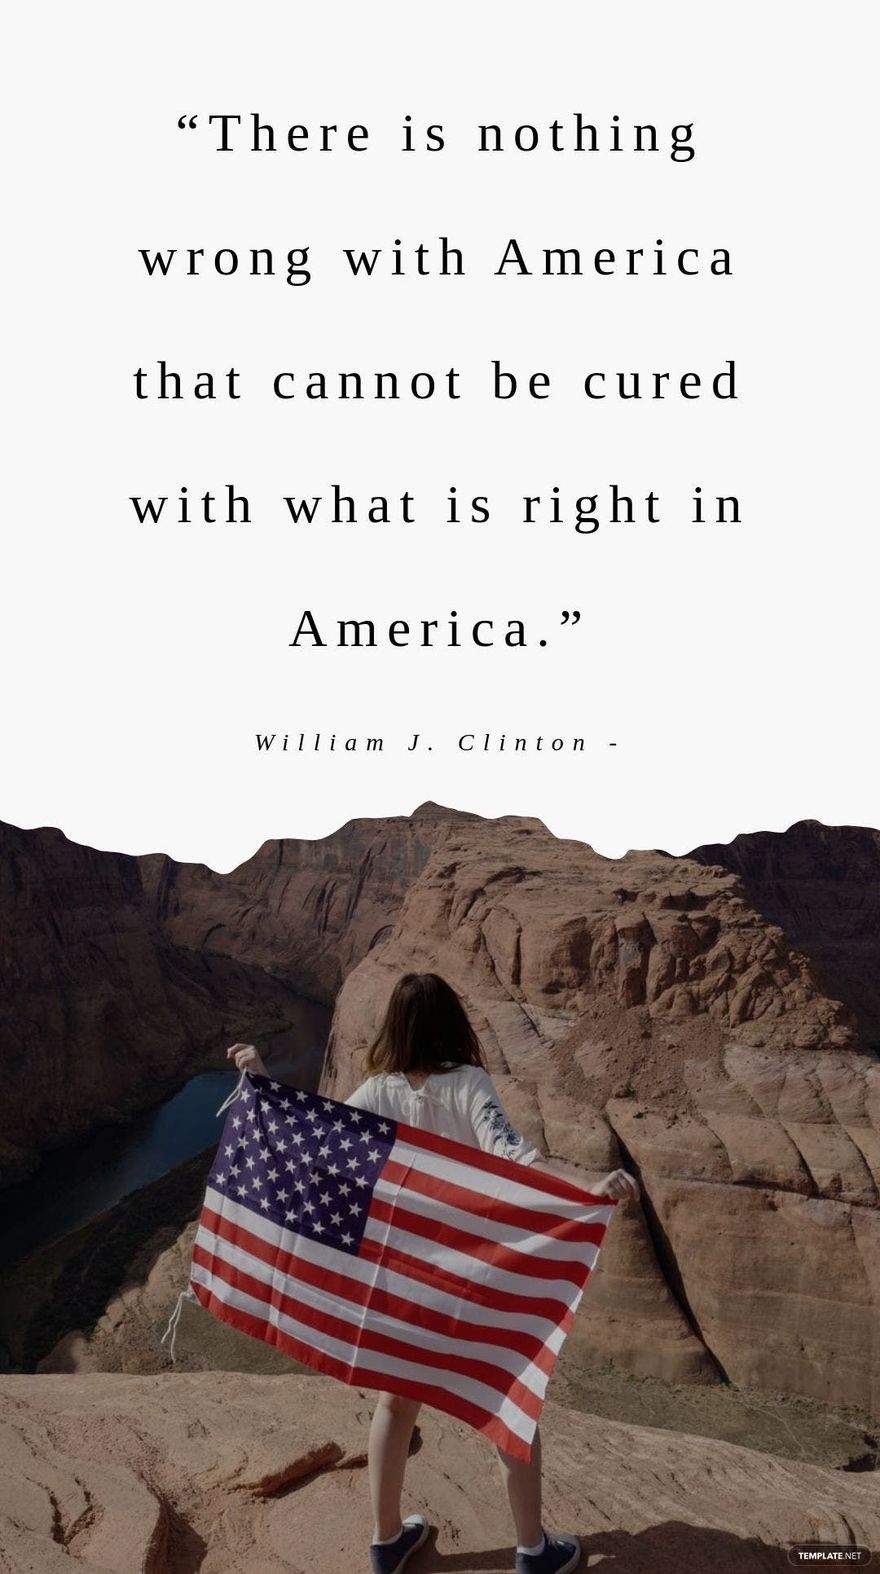 William J. Clinton - “There is nothing wrong with America that cannot be cured with what is right in America.”